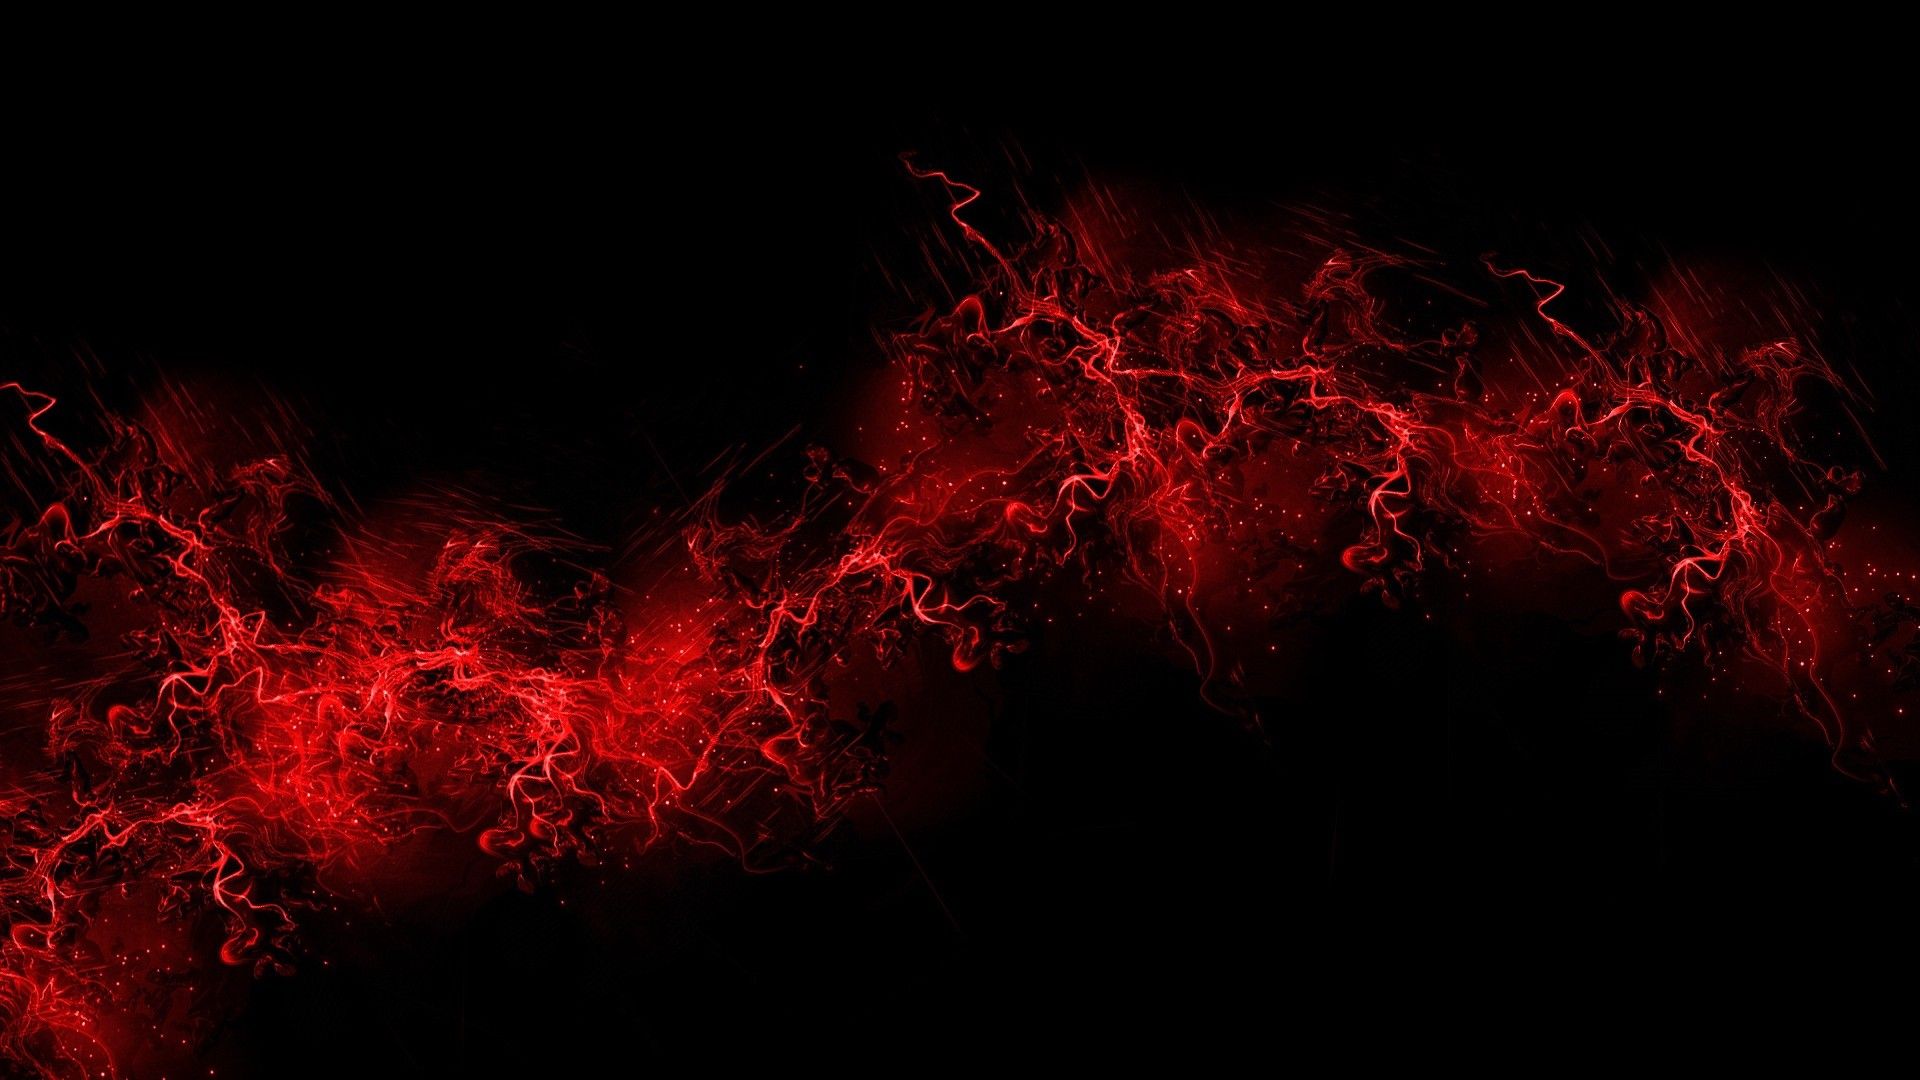 Red Gaming Wallpapers Wallpaper Cave